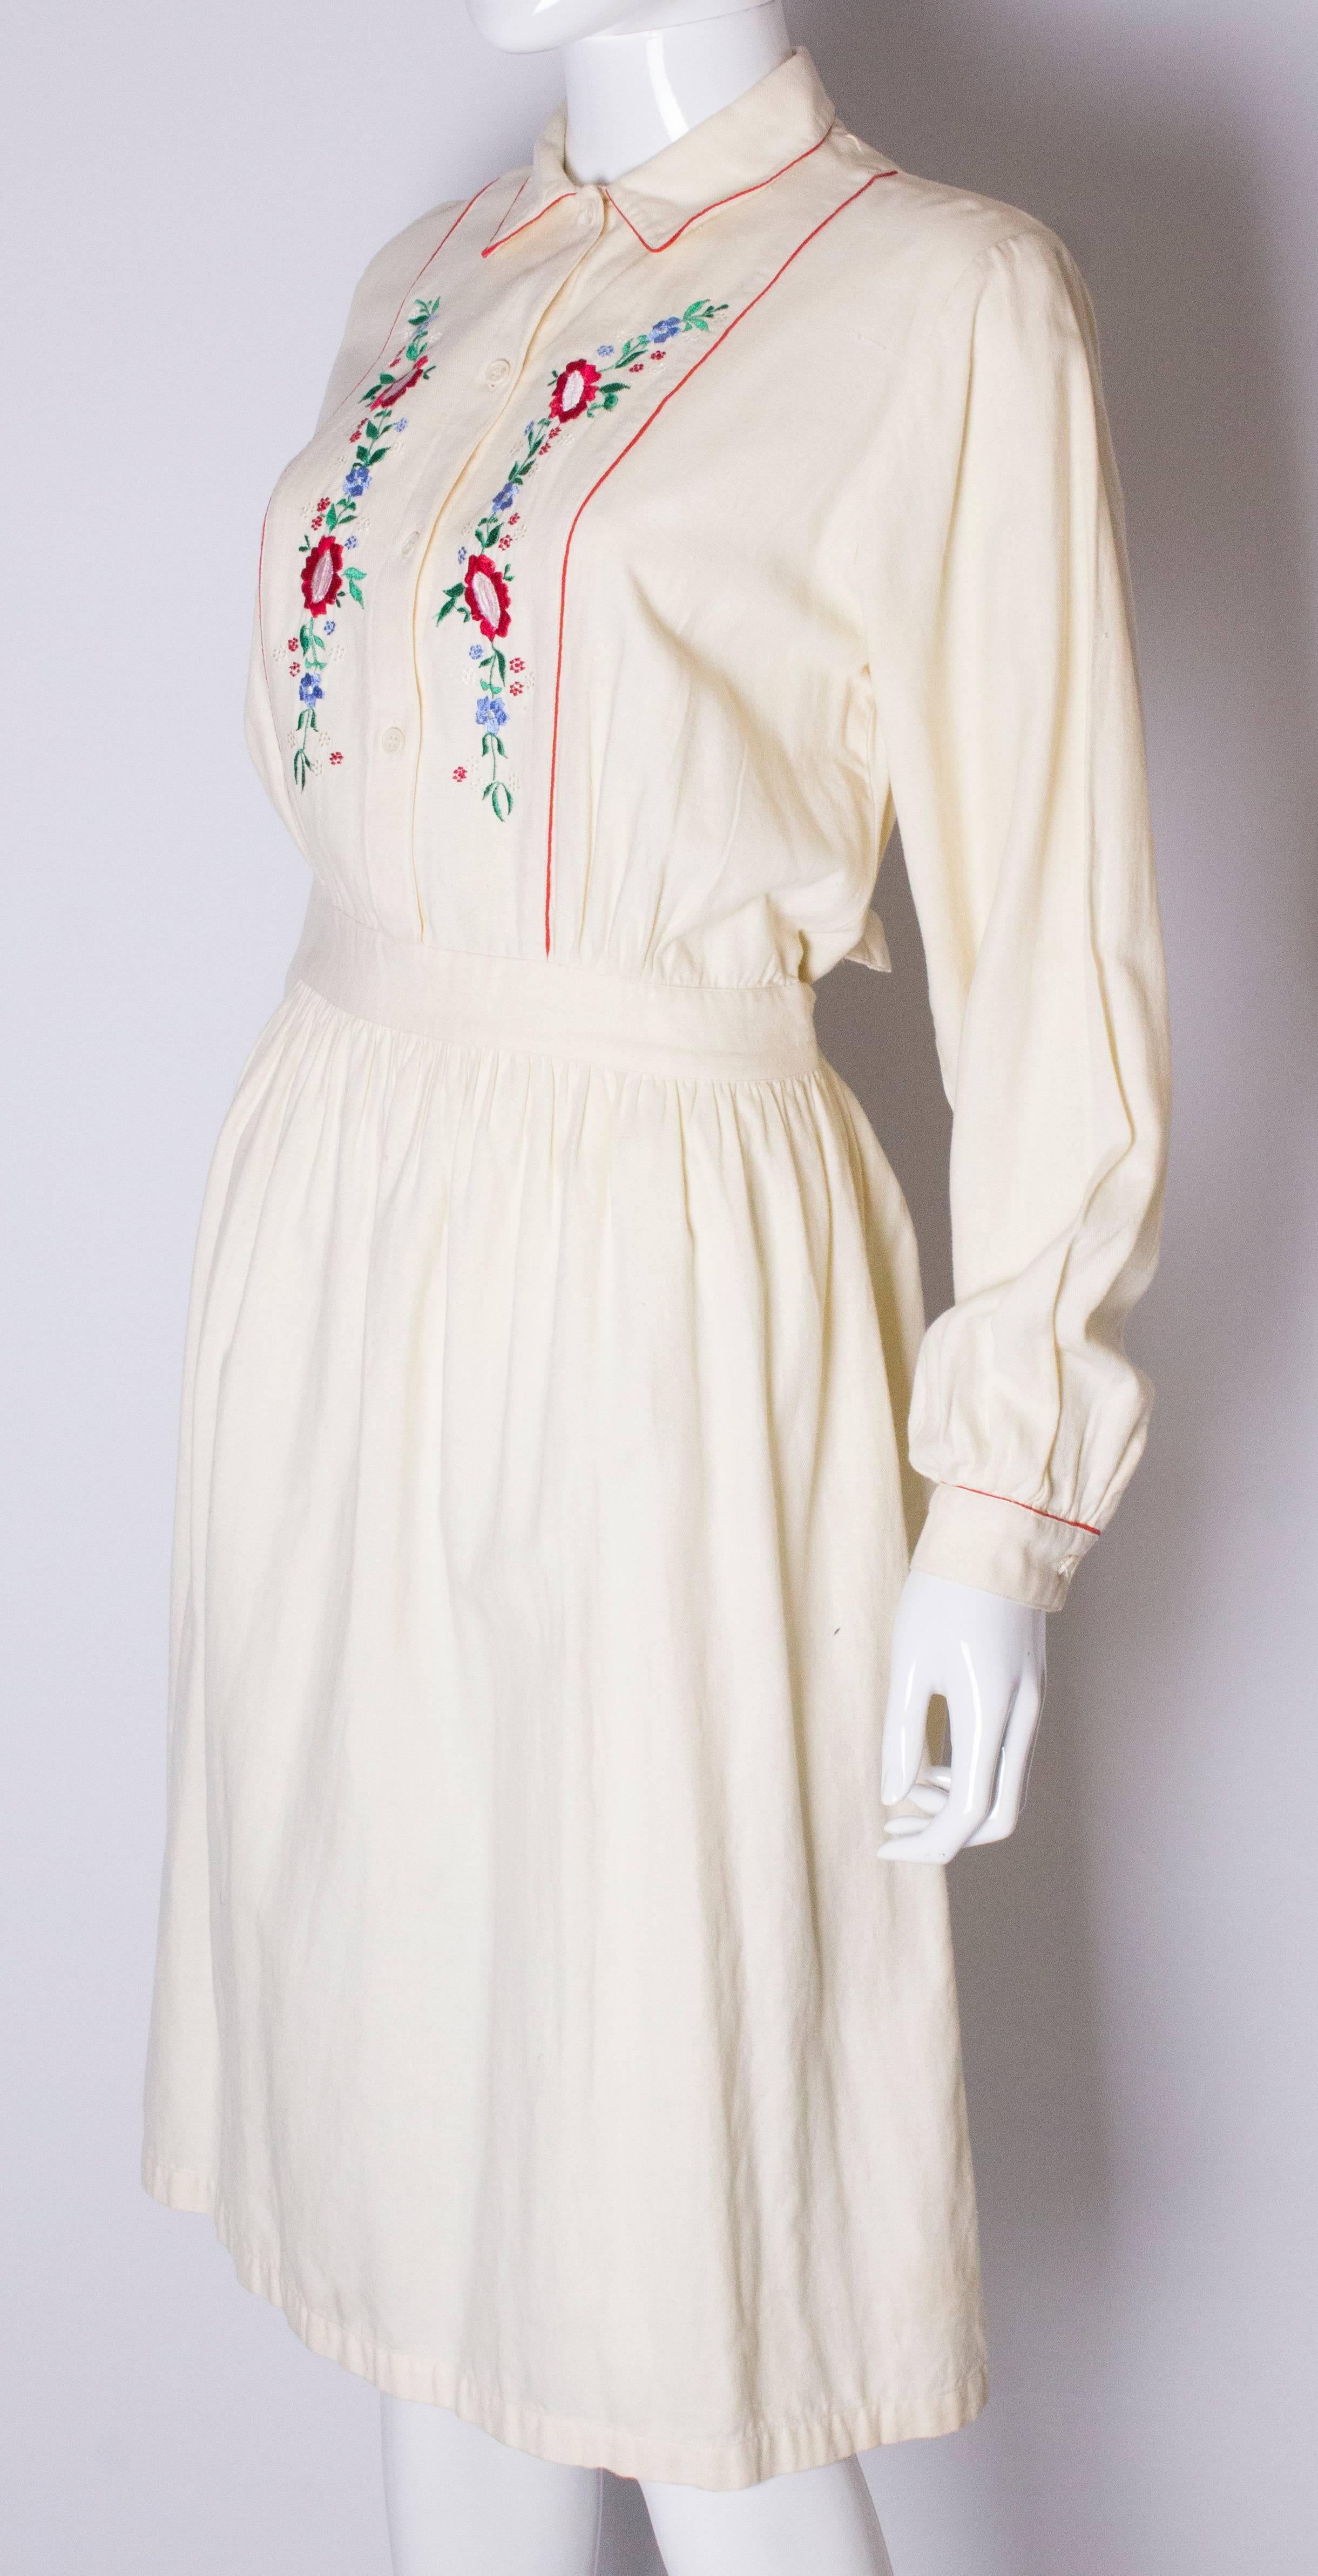 Beige A Vintage 1970s floral embroidered cotton day dress by Miss Selfridge 